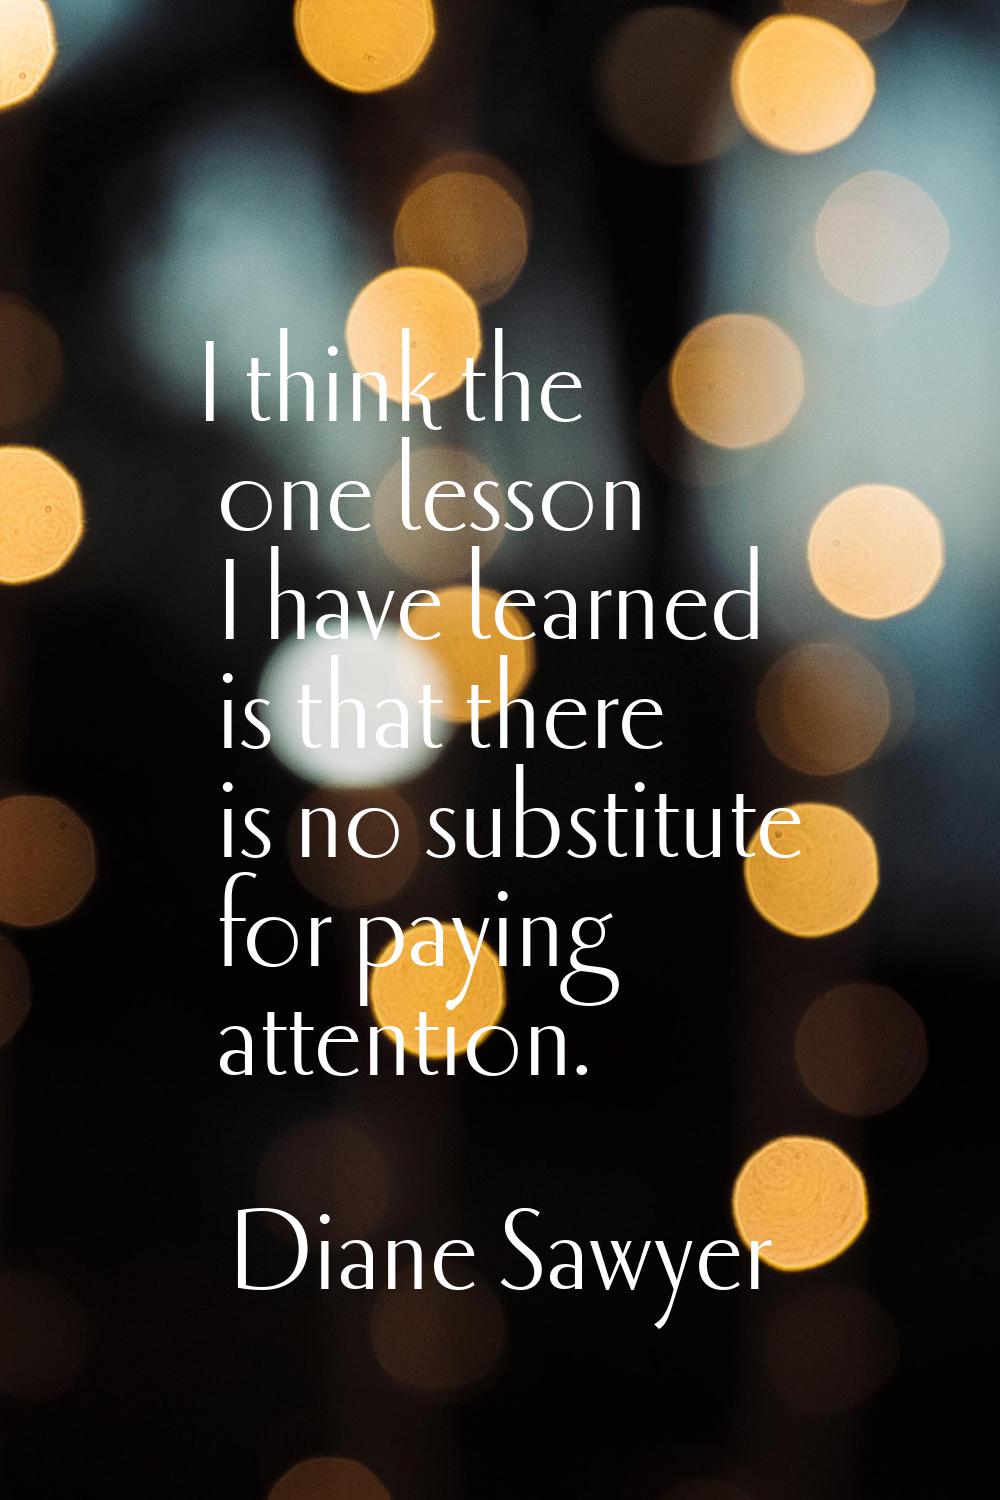 I think the one lesson I have learned is that there is no substitute for paying attention.